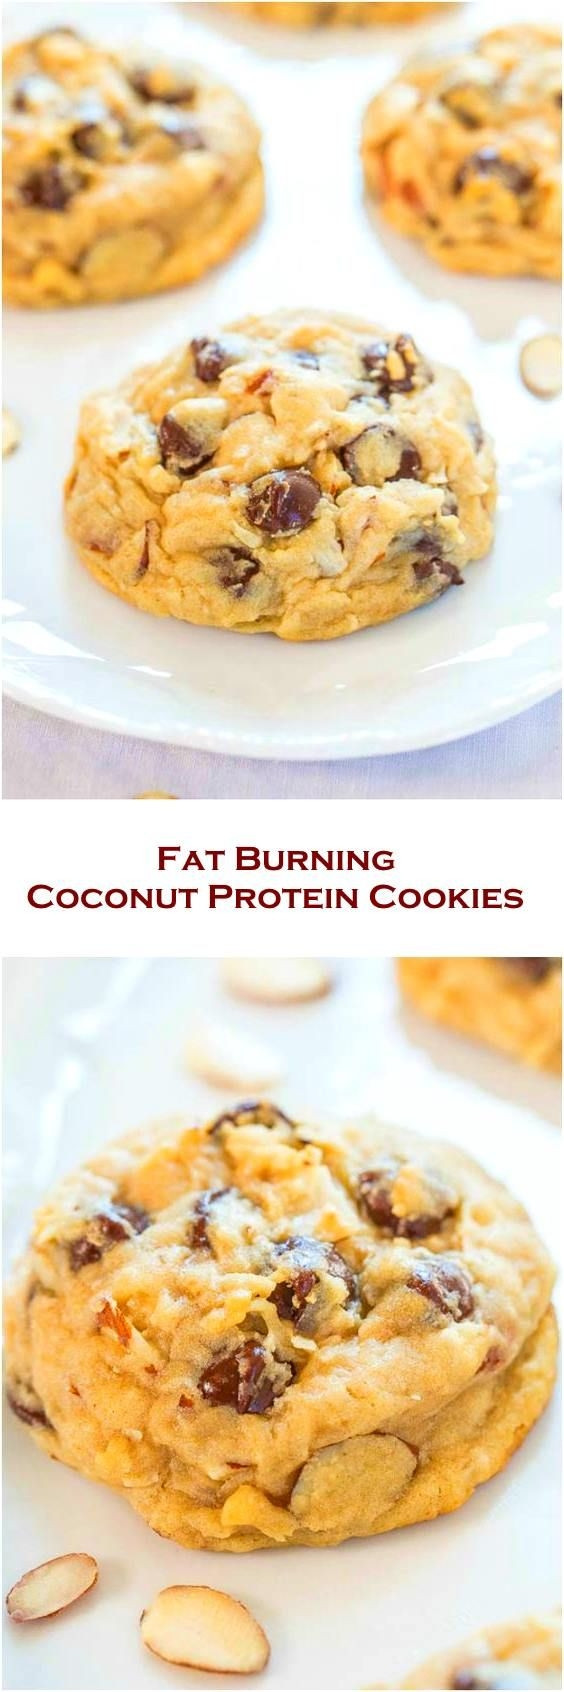 Healthy Fat Burning Breakfast
 Fat Burning Coconut Cookies You Can Eat for Breakfast to